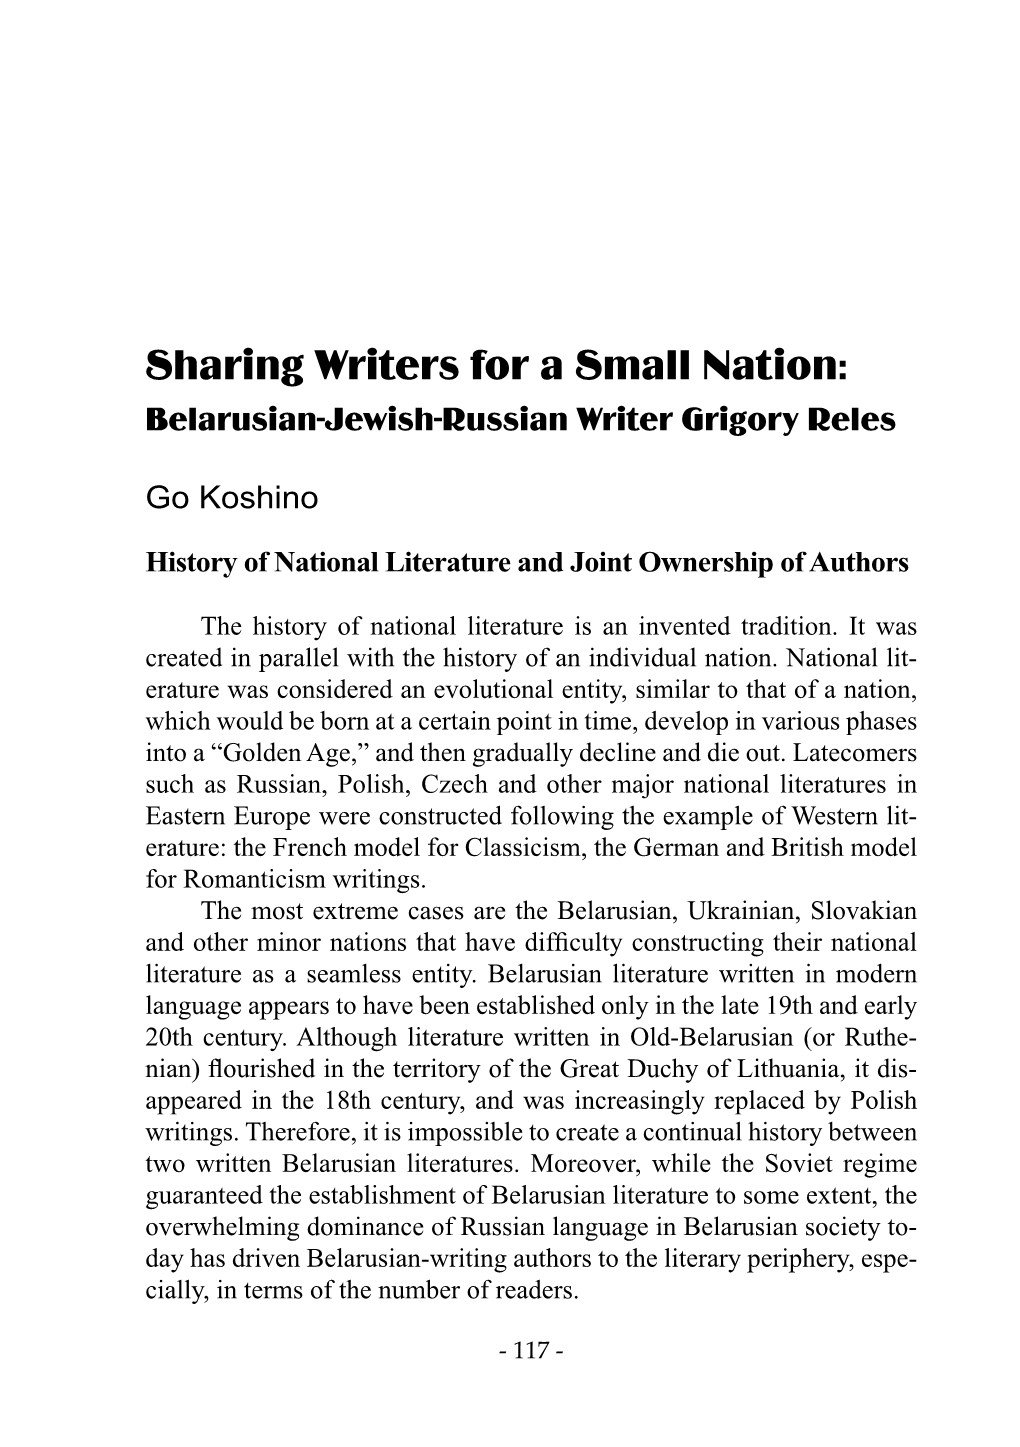 Sharing Writers for a Small Nation: Belarusian-Jewish-Russian Writer Grigory Reles